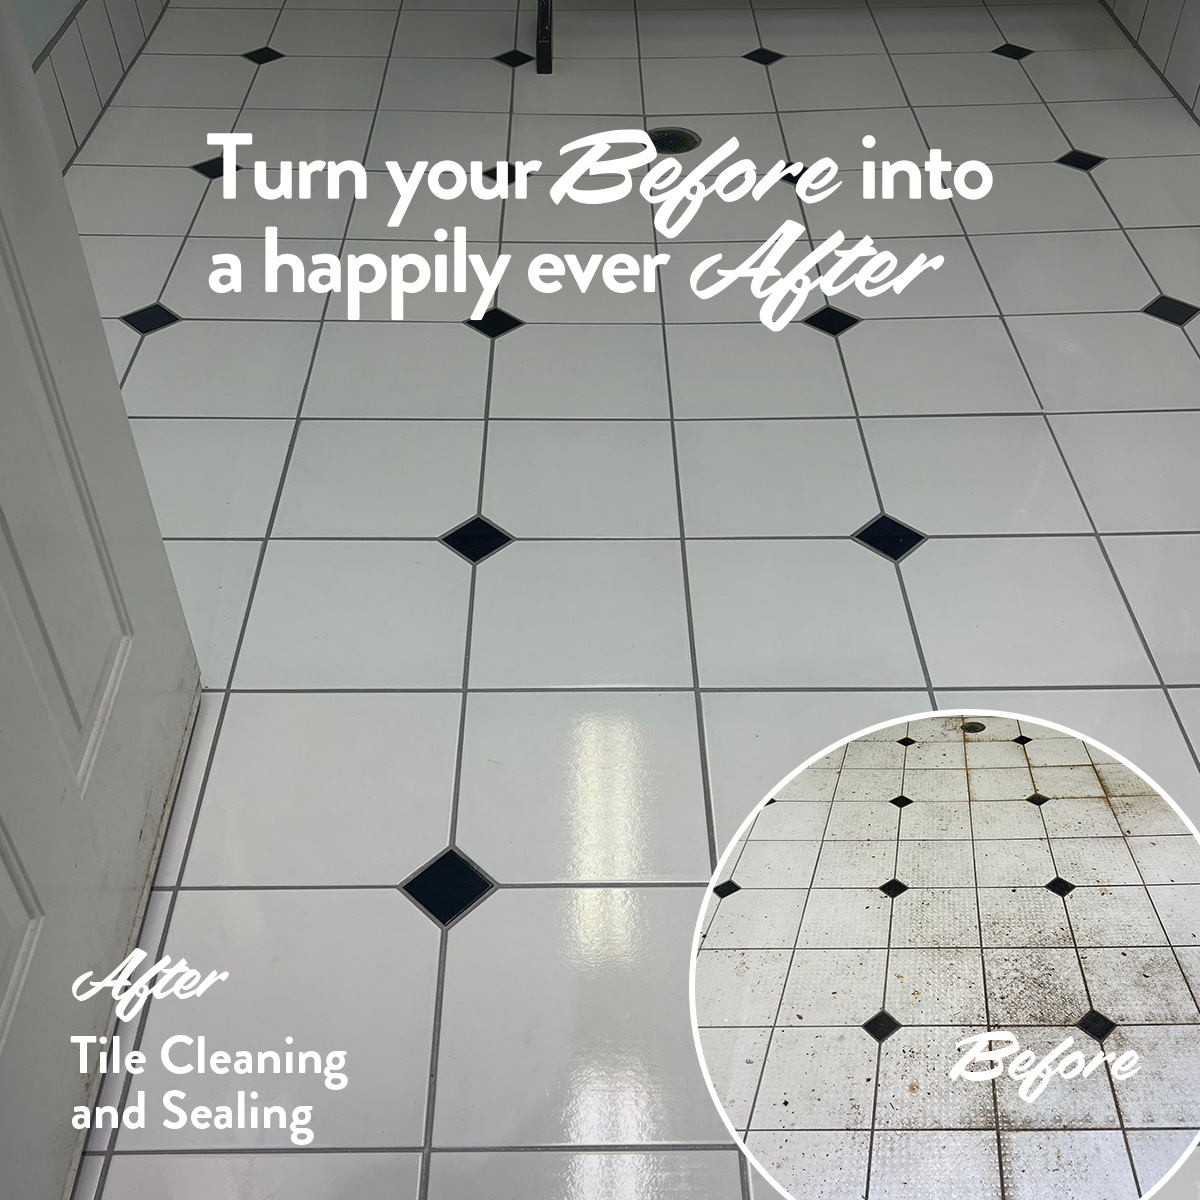 Tile Cleaning and Sealing